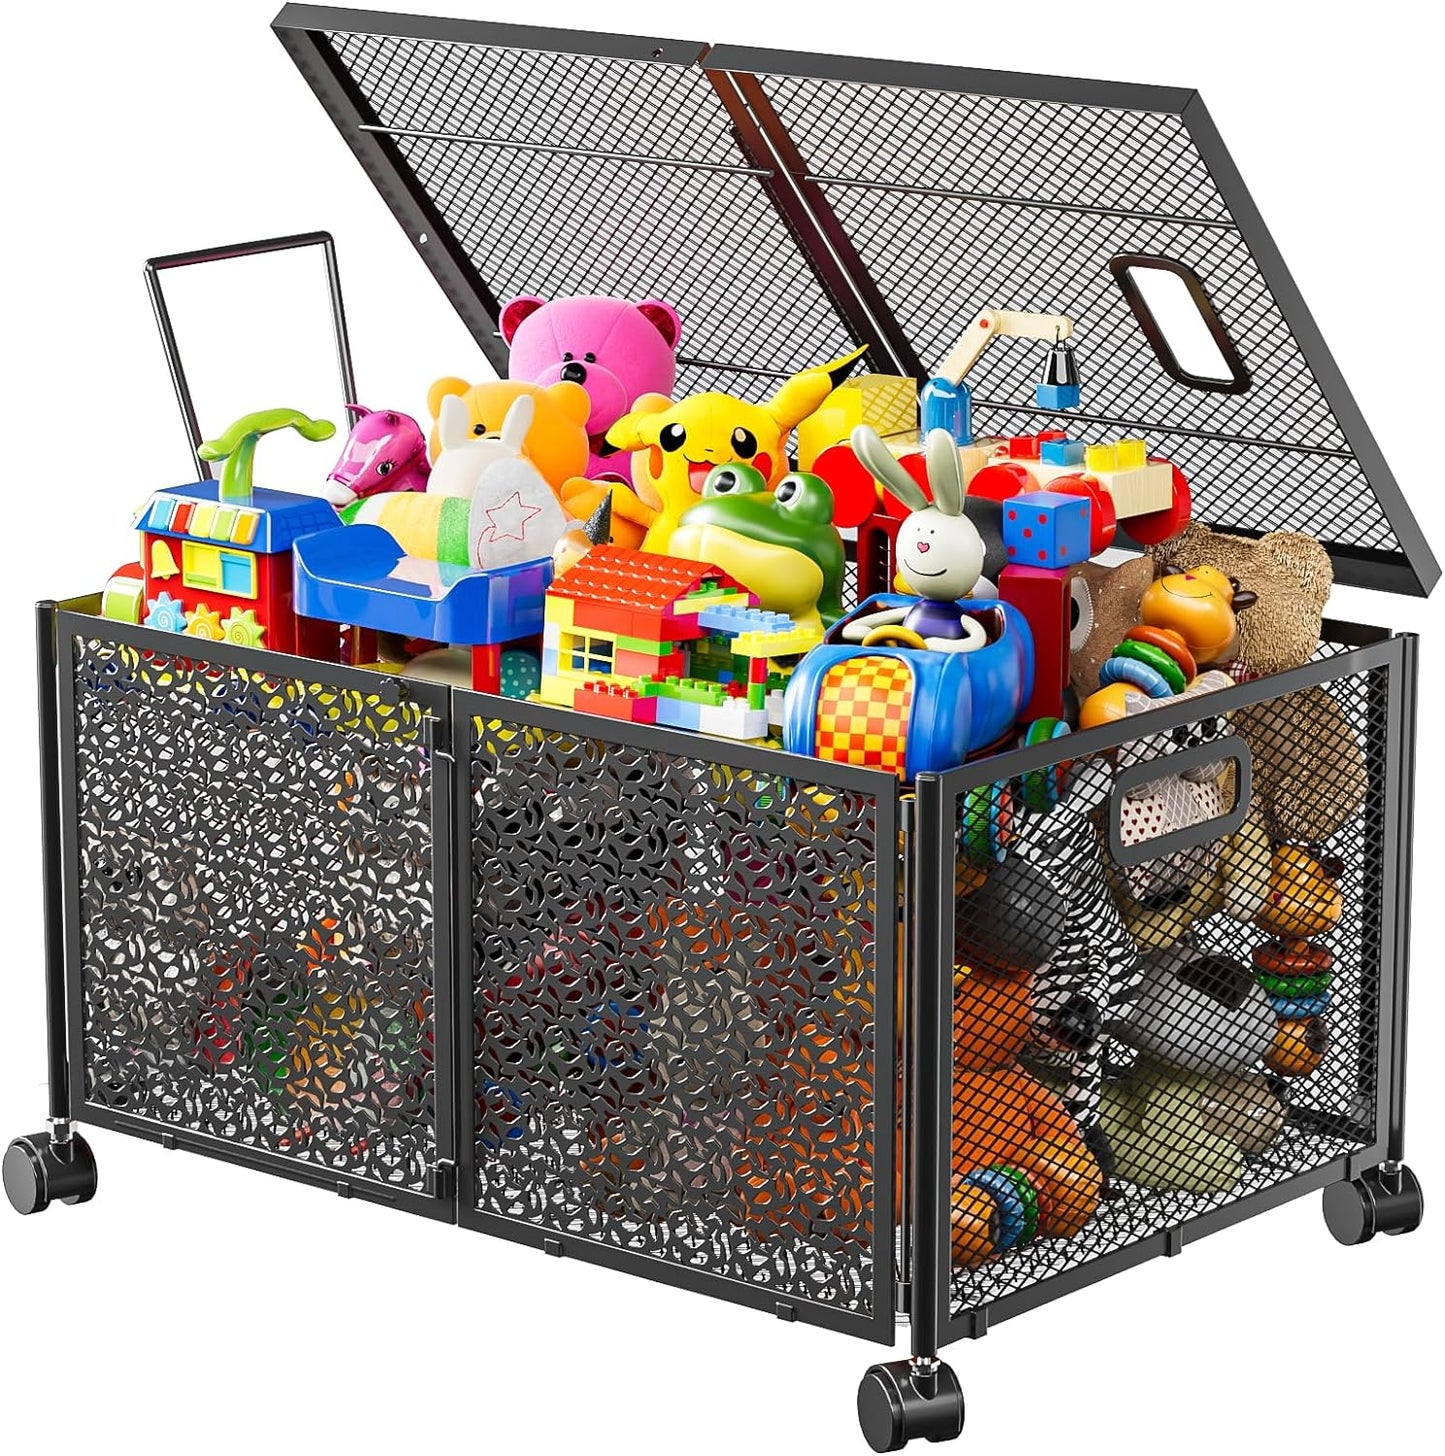 Nefoso Toy Box Storage, Foldable Metal Kids Toy Chest with Wheels for Bedroom Nursery Playroom